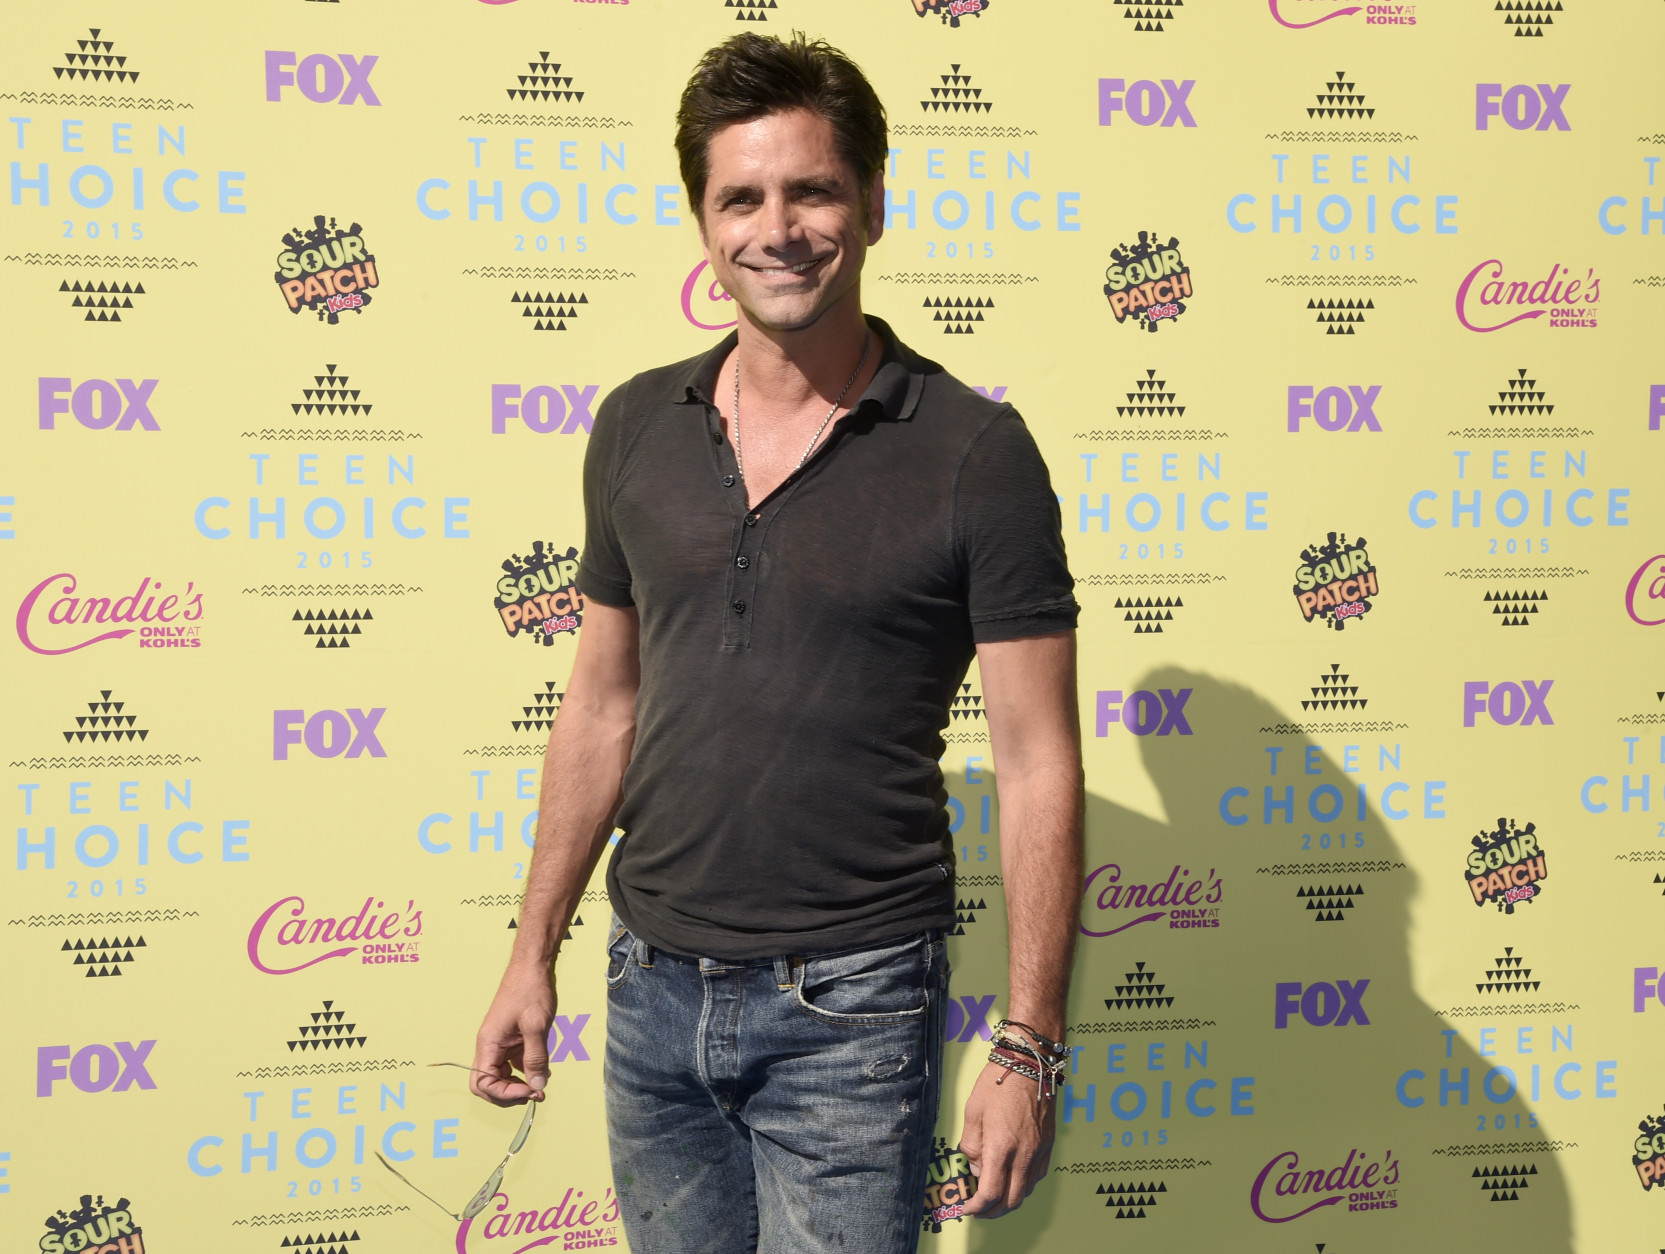 John Stamos arrives at the Teen Choice Awards at the Galen Center on Sunday, Aug. 16, 2015, in Los Angeles. (Photo by Chris Pizzello/Invision/AP)